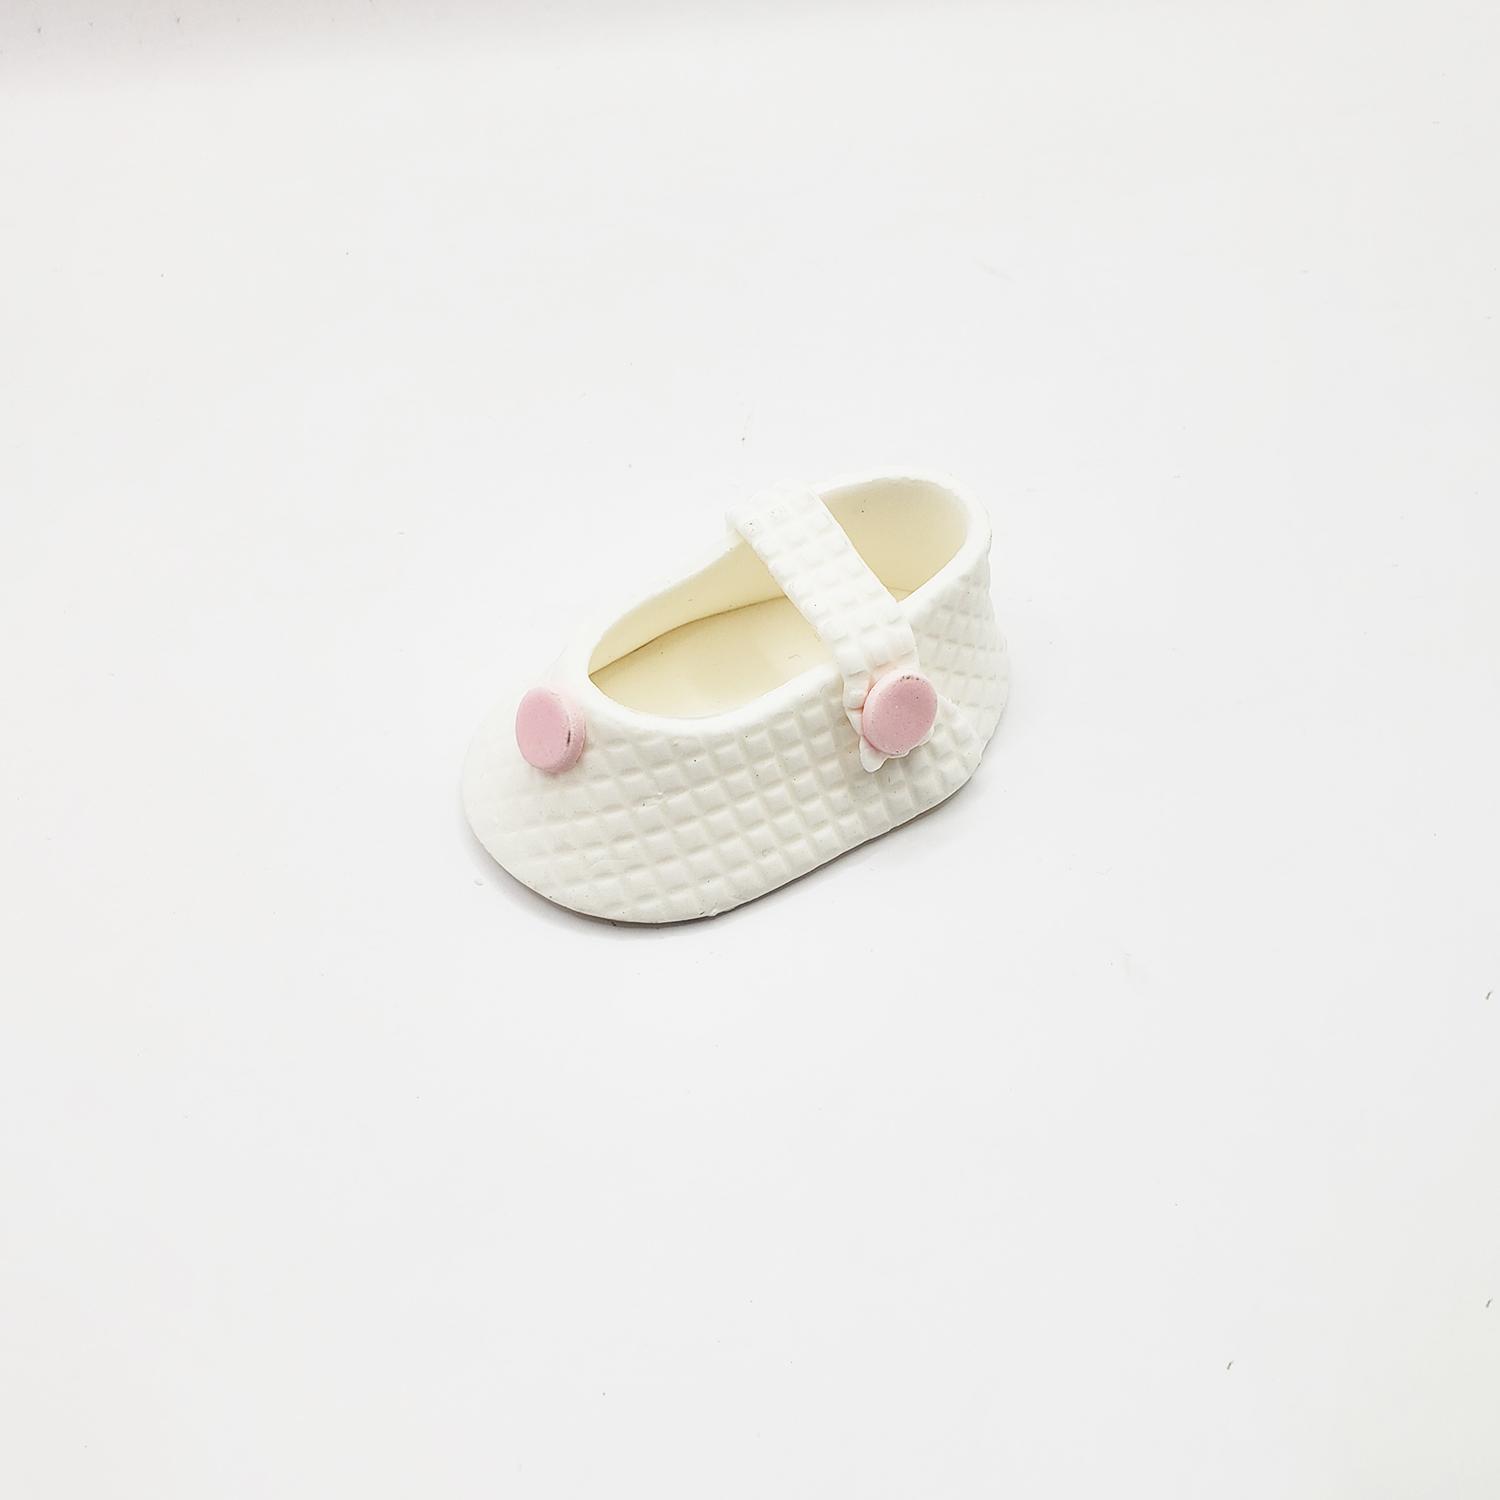 PURPLE SUGARCRAFT EDIBLE SMALL WHITE BABY BOOTIES